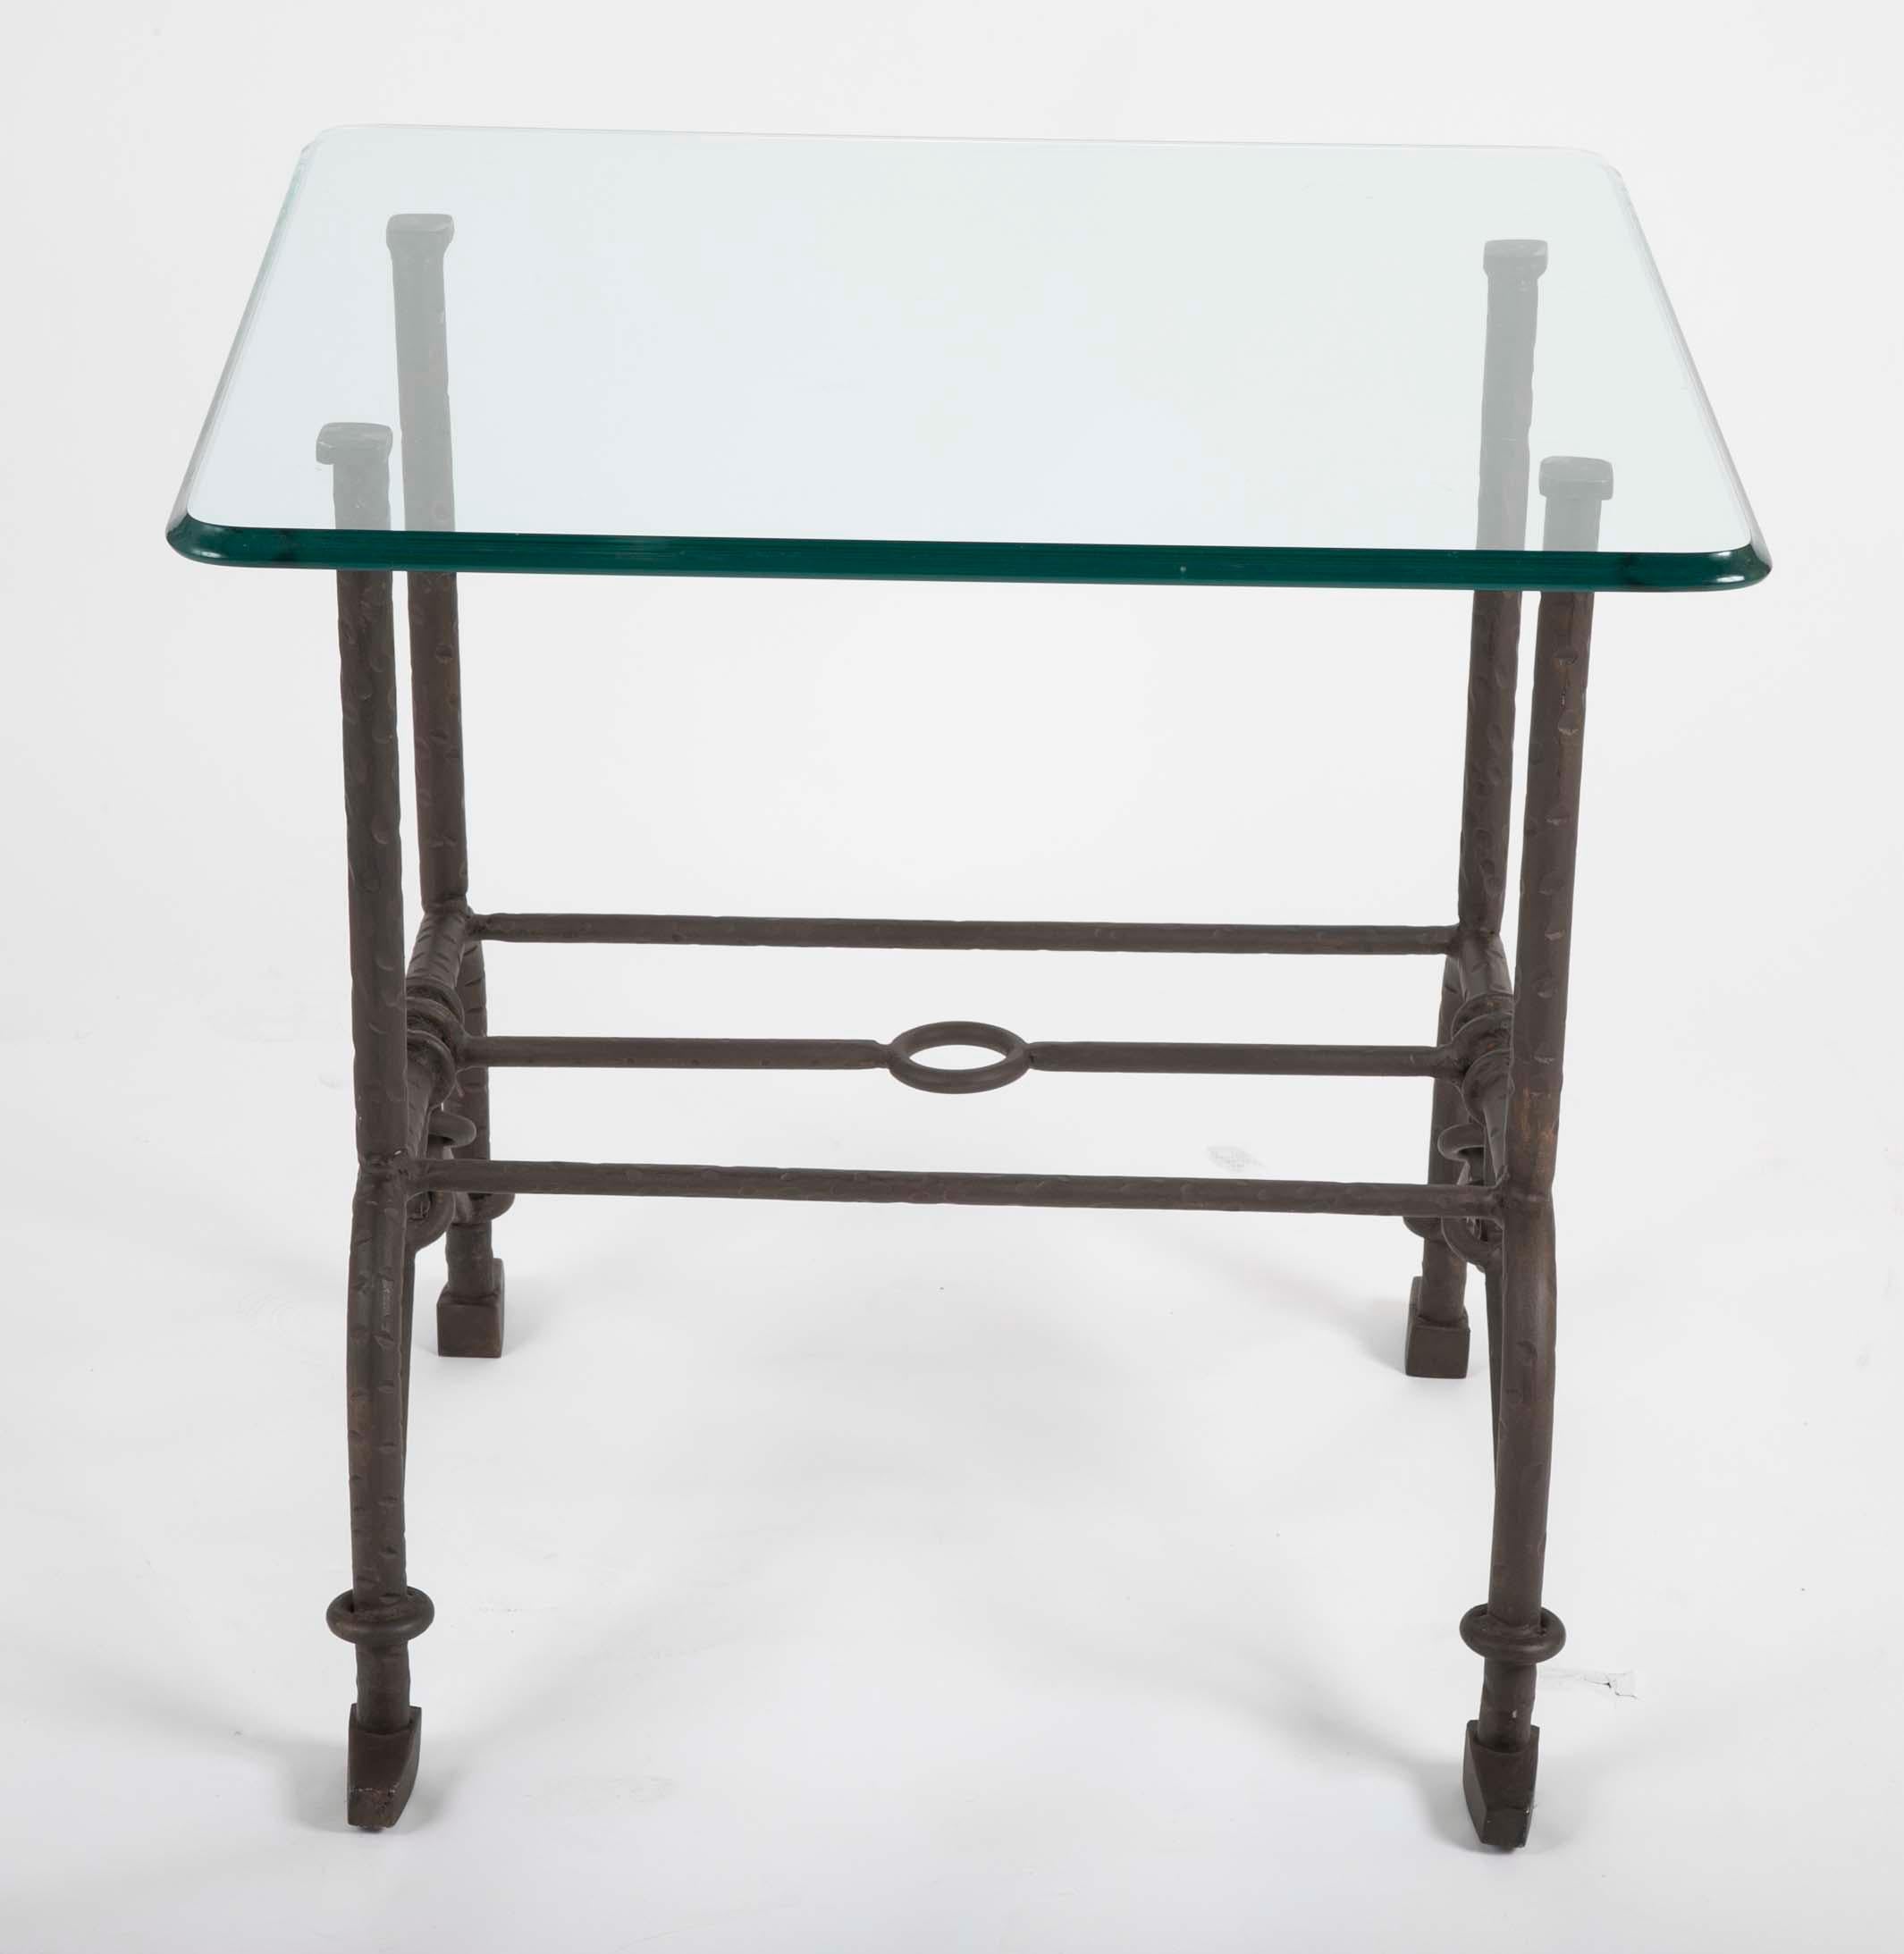 A Glass top patinated steel side table in the style of Giacometti.